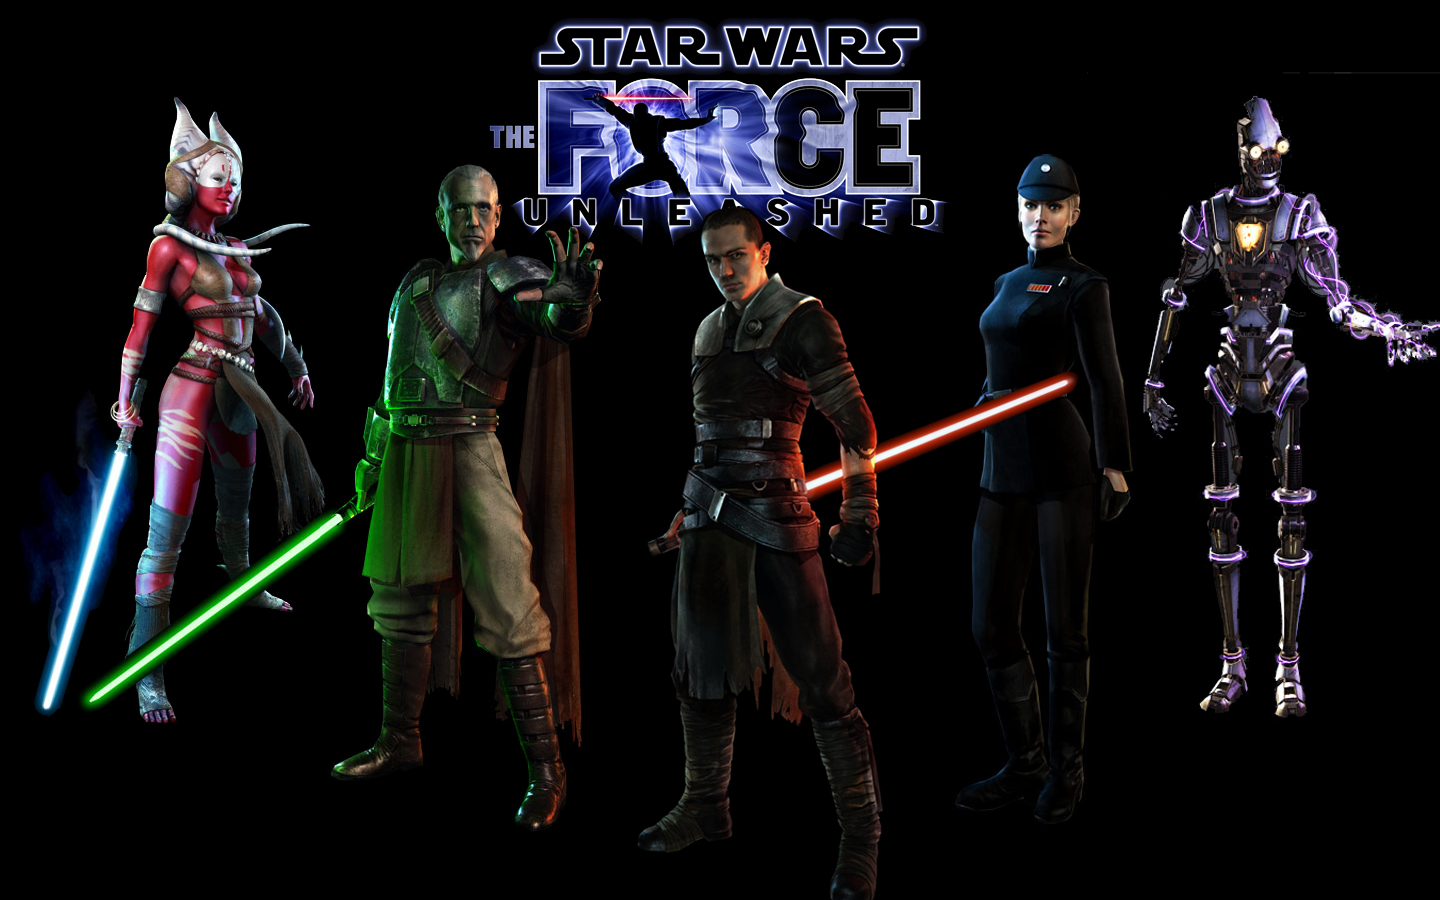 The Force Unleashed wallpaper by JediKnight14 1440x900